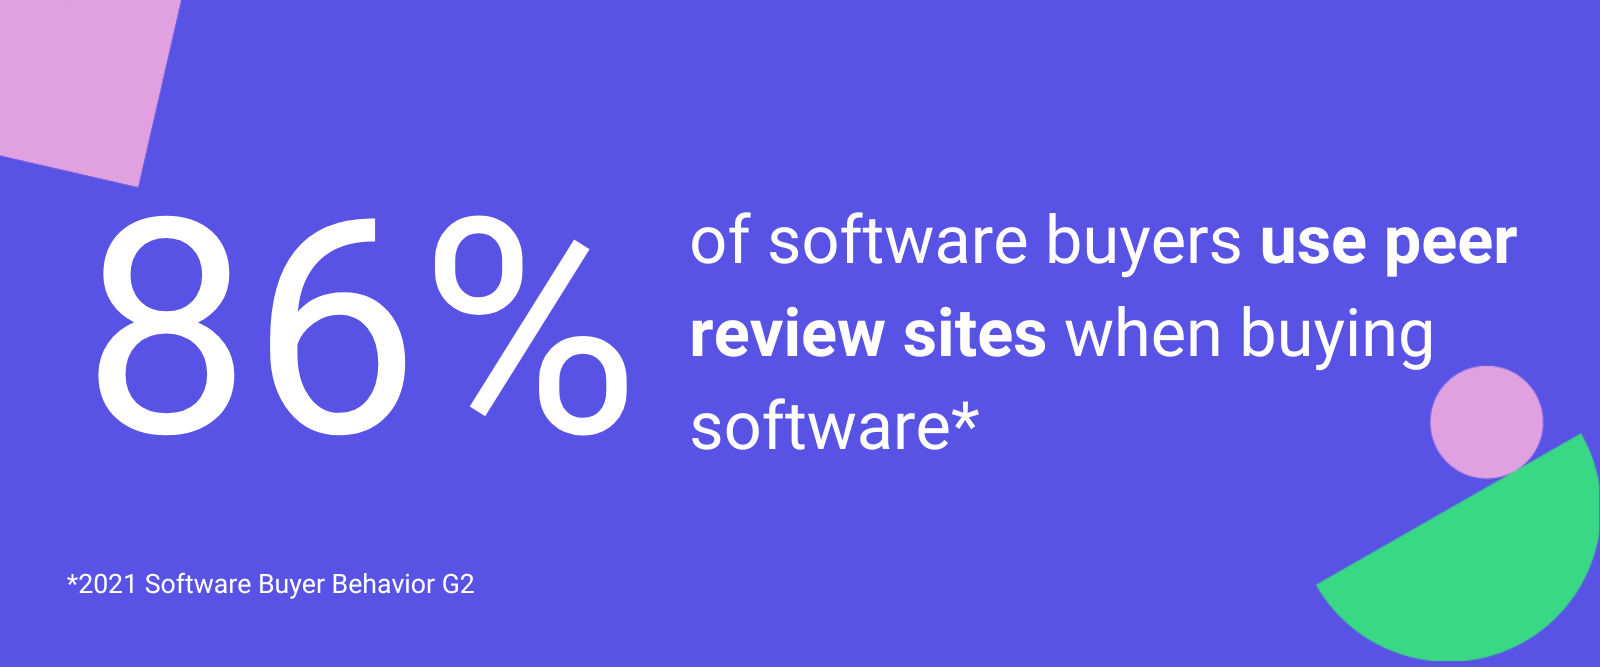 86% of software buyers use peer review sites when buying software